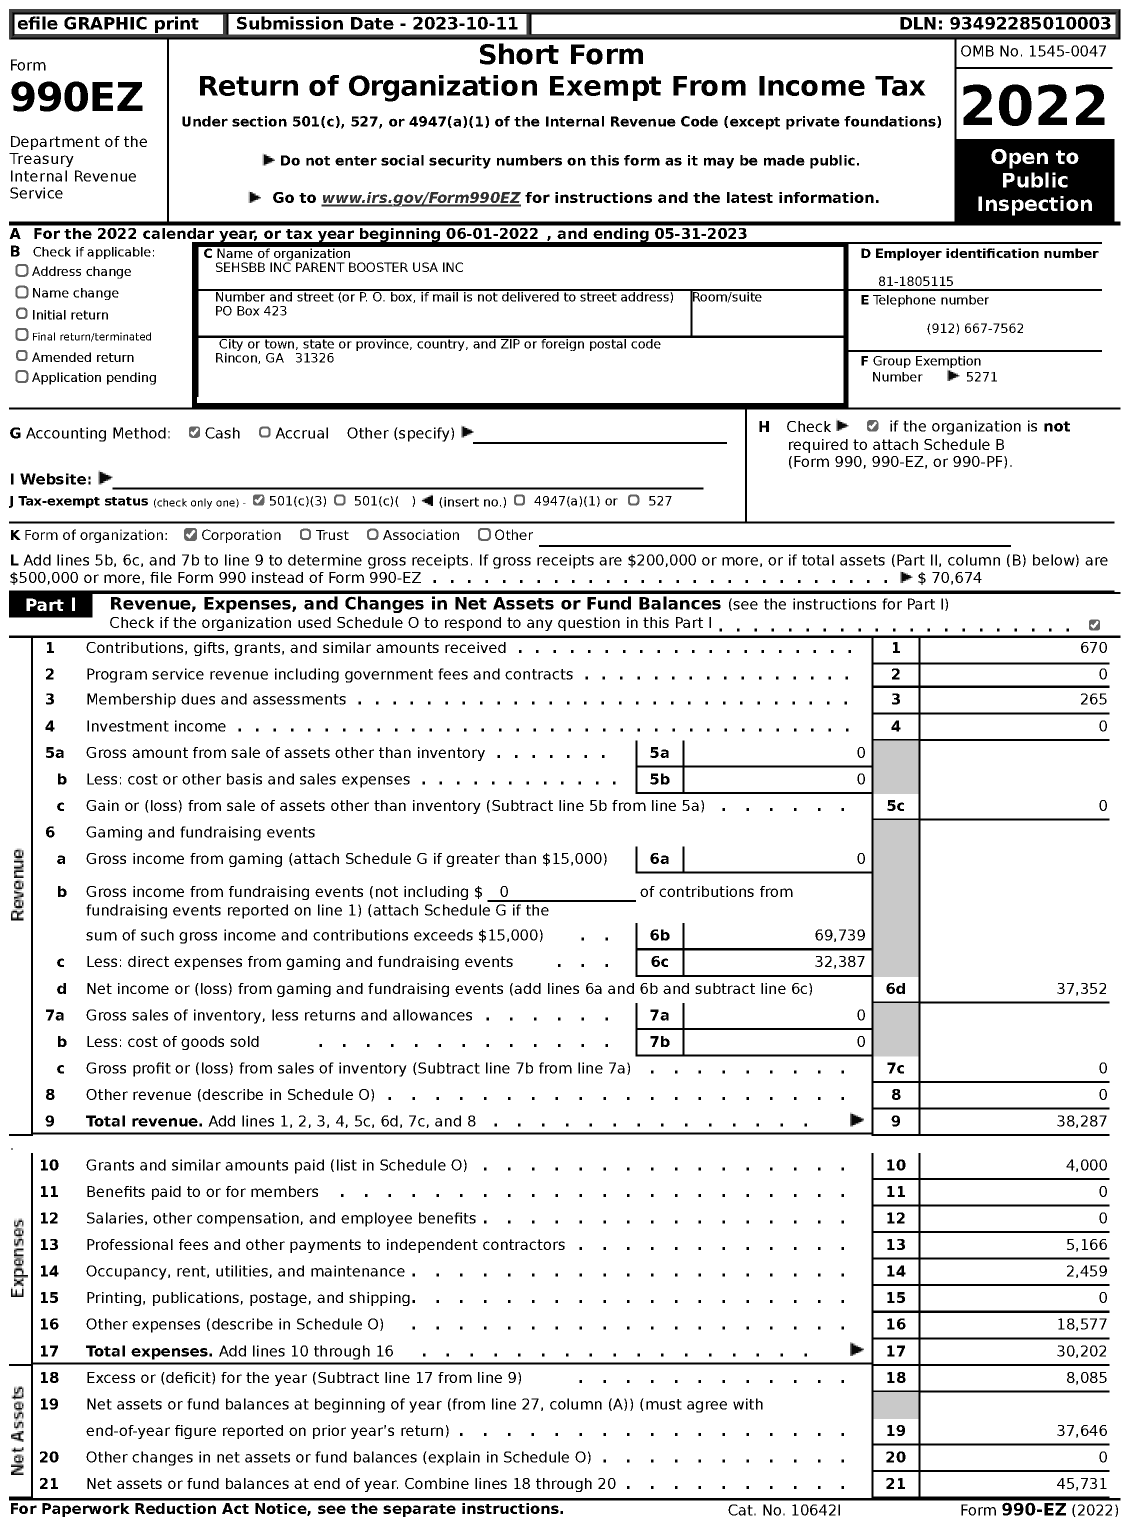 Image of first page of 2022 Form 990EZ for Sehsbb Parent Booster USA